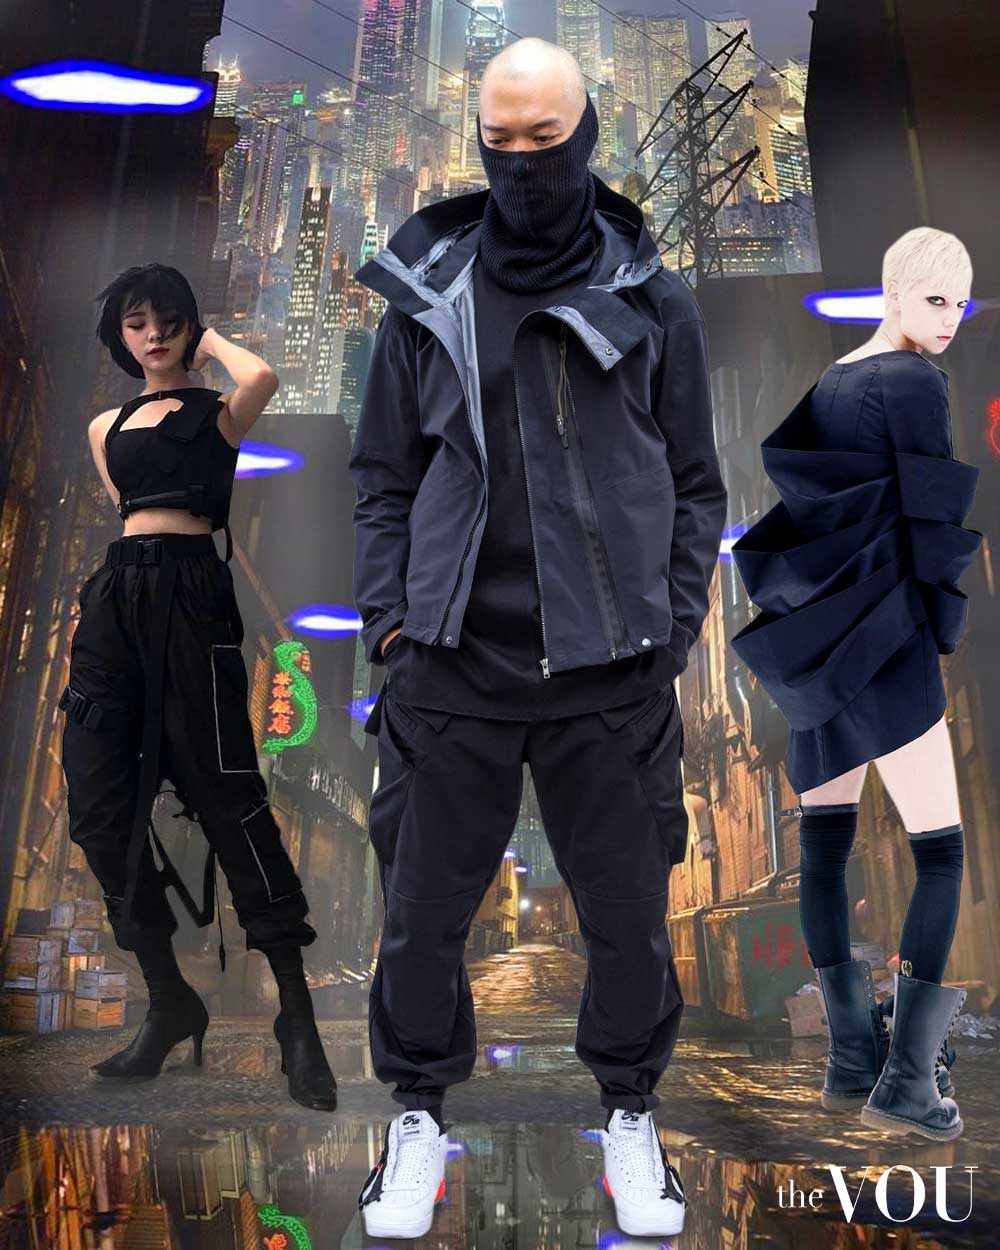 10 Best Cyberpunk Clothing Stores For A Futuristic Look | atelier-yuwa ...